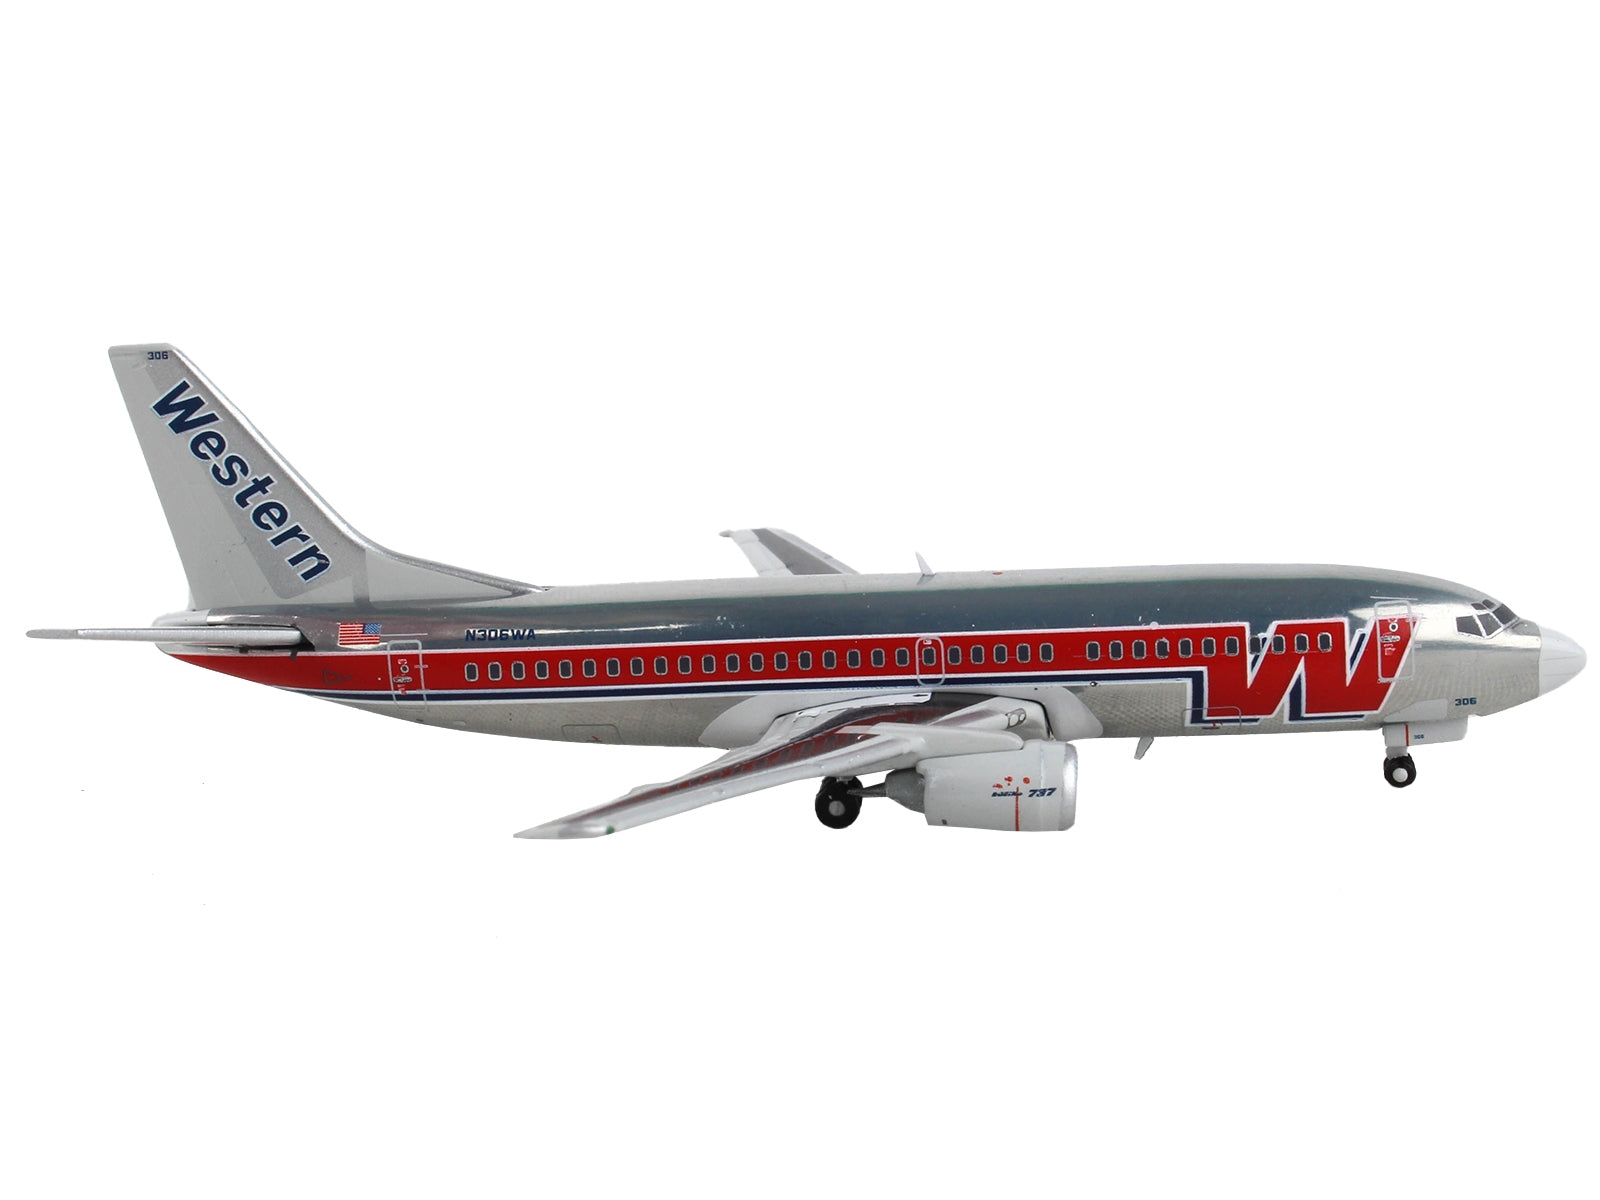 Boeing 737-300 Commercial Aircraft "Western Airlines" Silver with Red Stripes 1/400 Diecast Model Airplane by GeminiJets